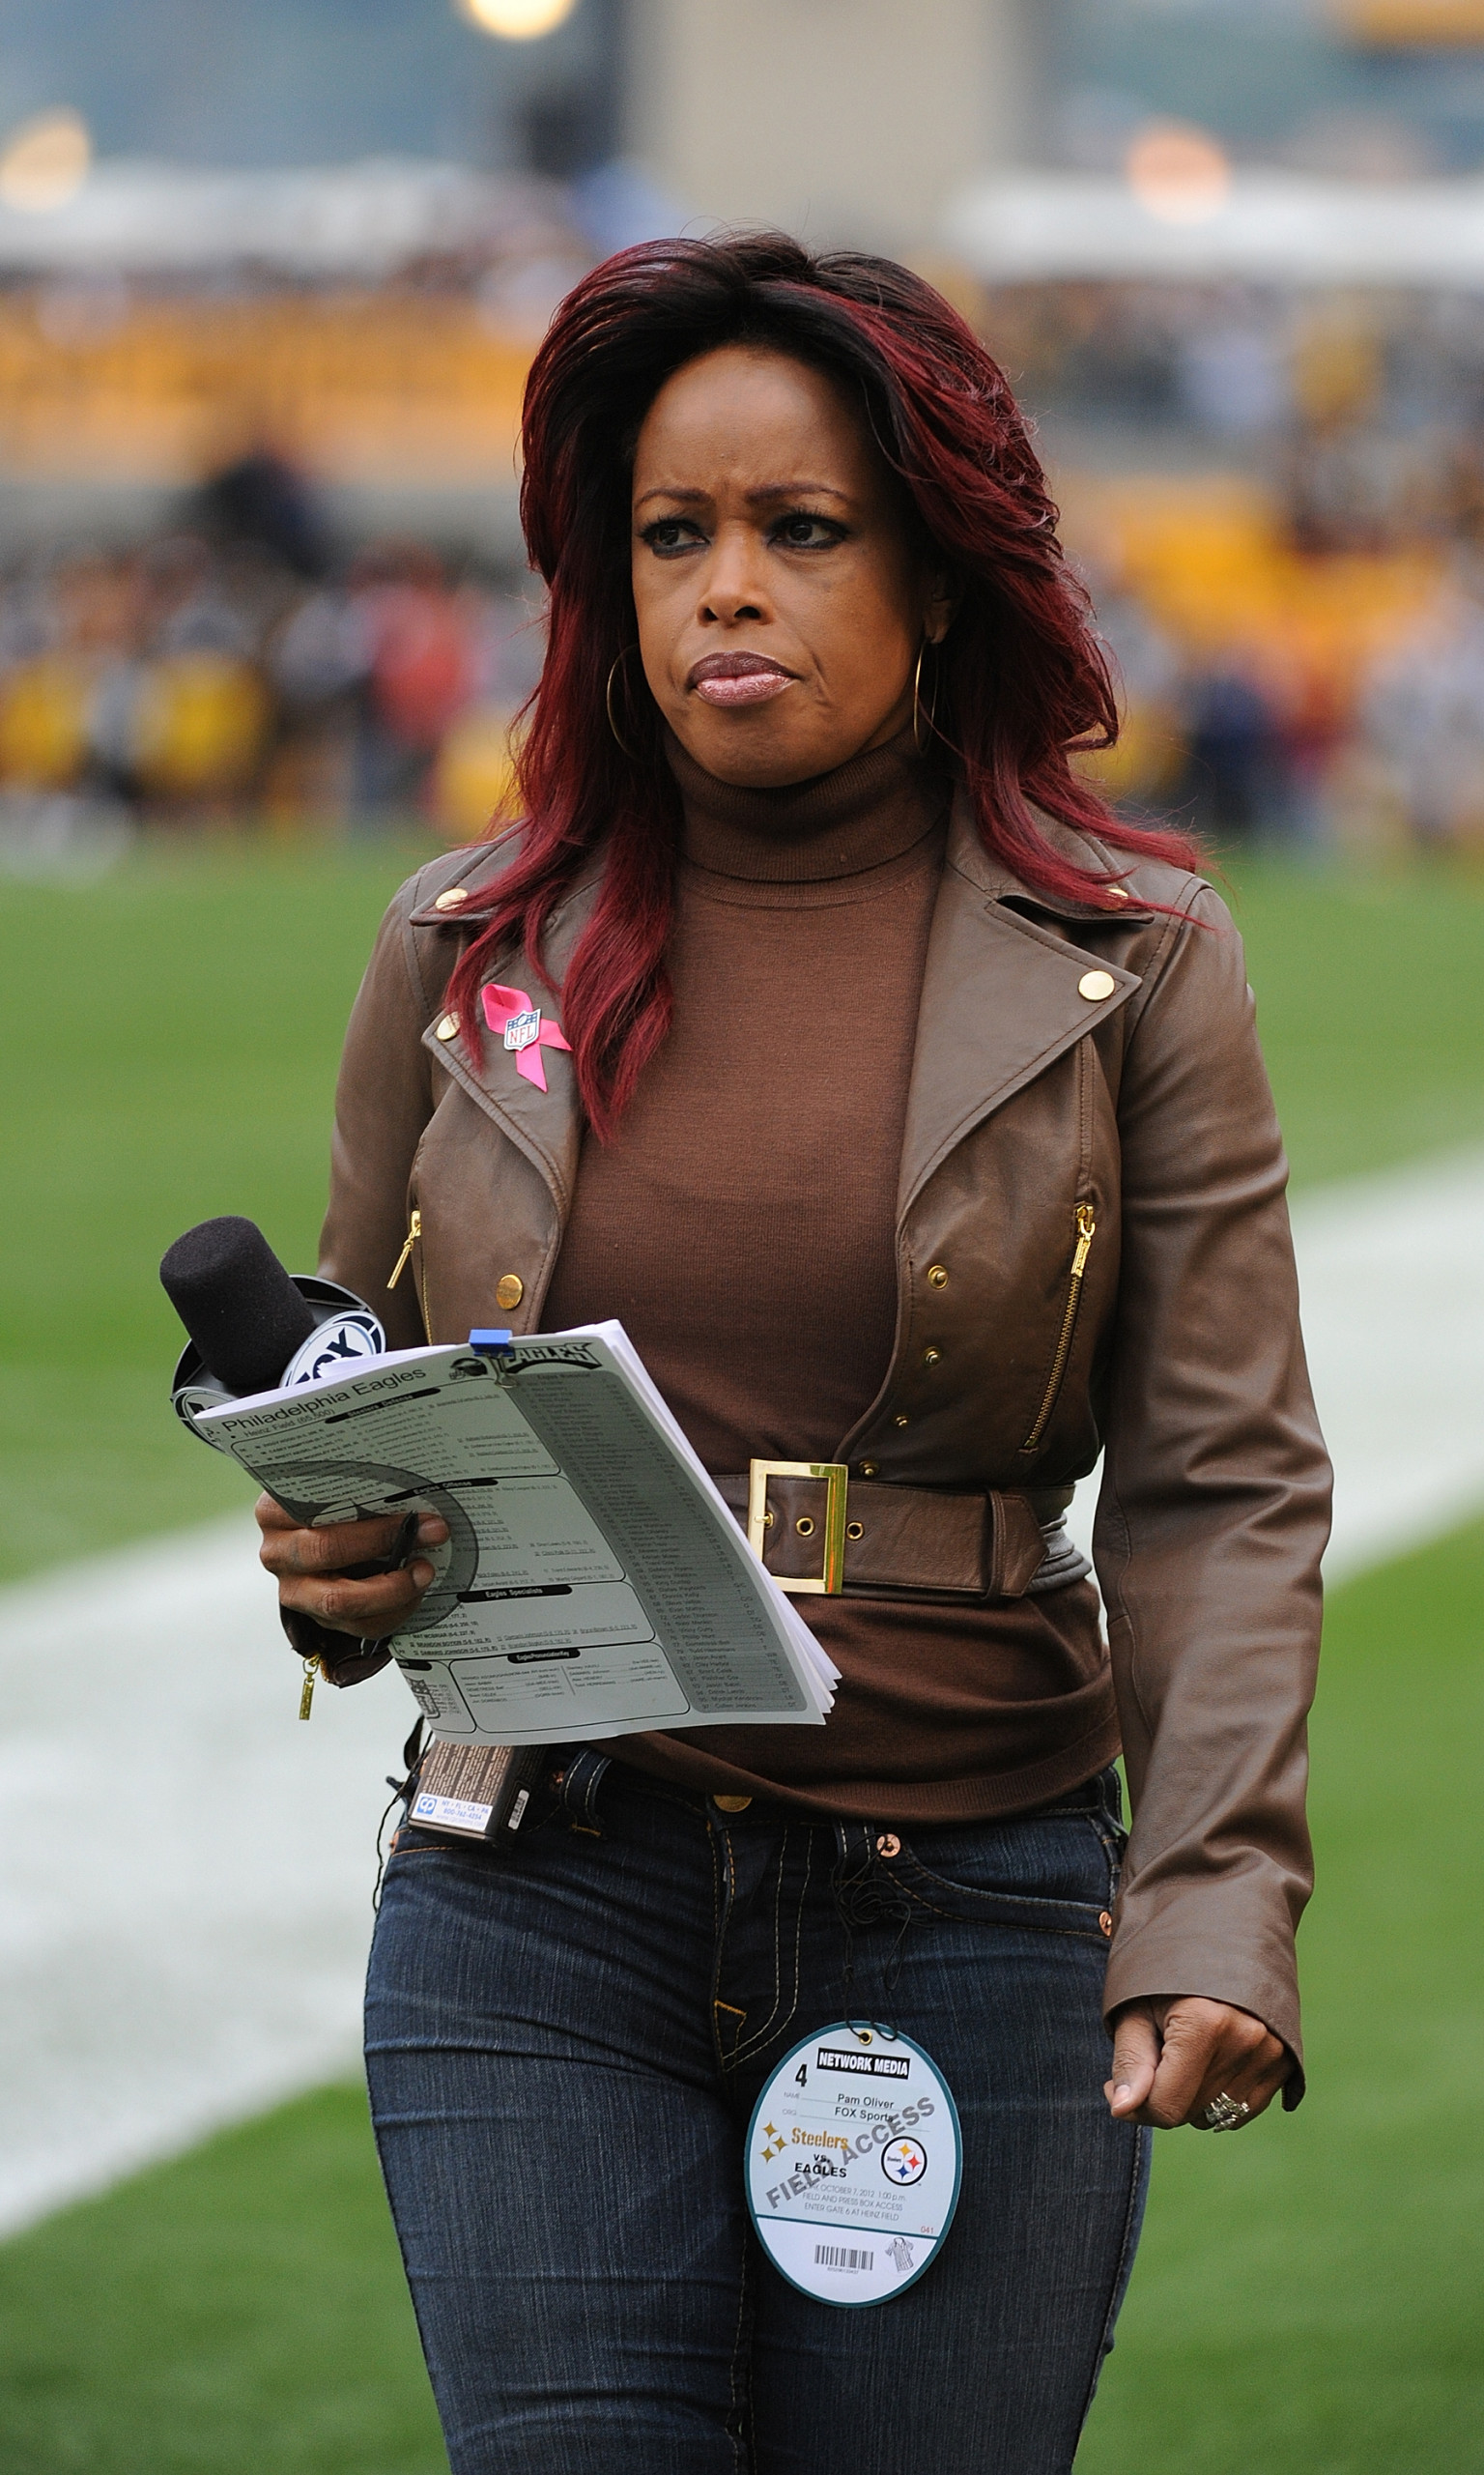 Pam Oliver Concussion: Reporter Injured After Getting Hit In Head With Football (VIDEO)